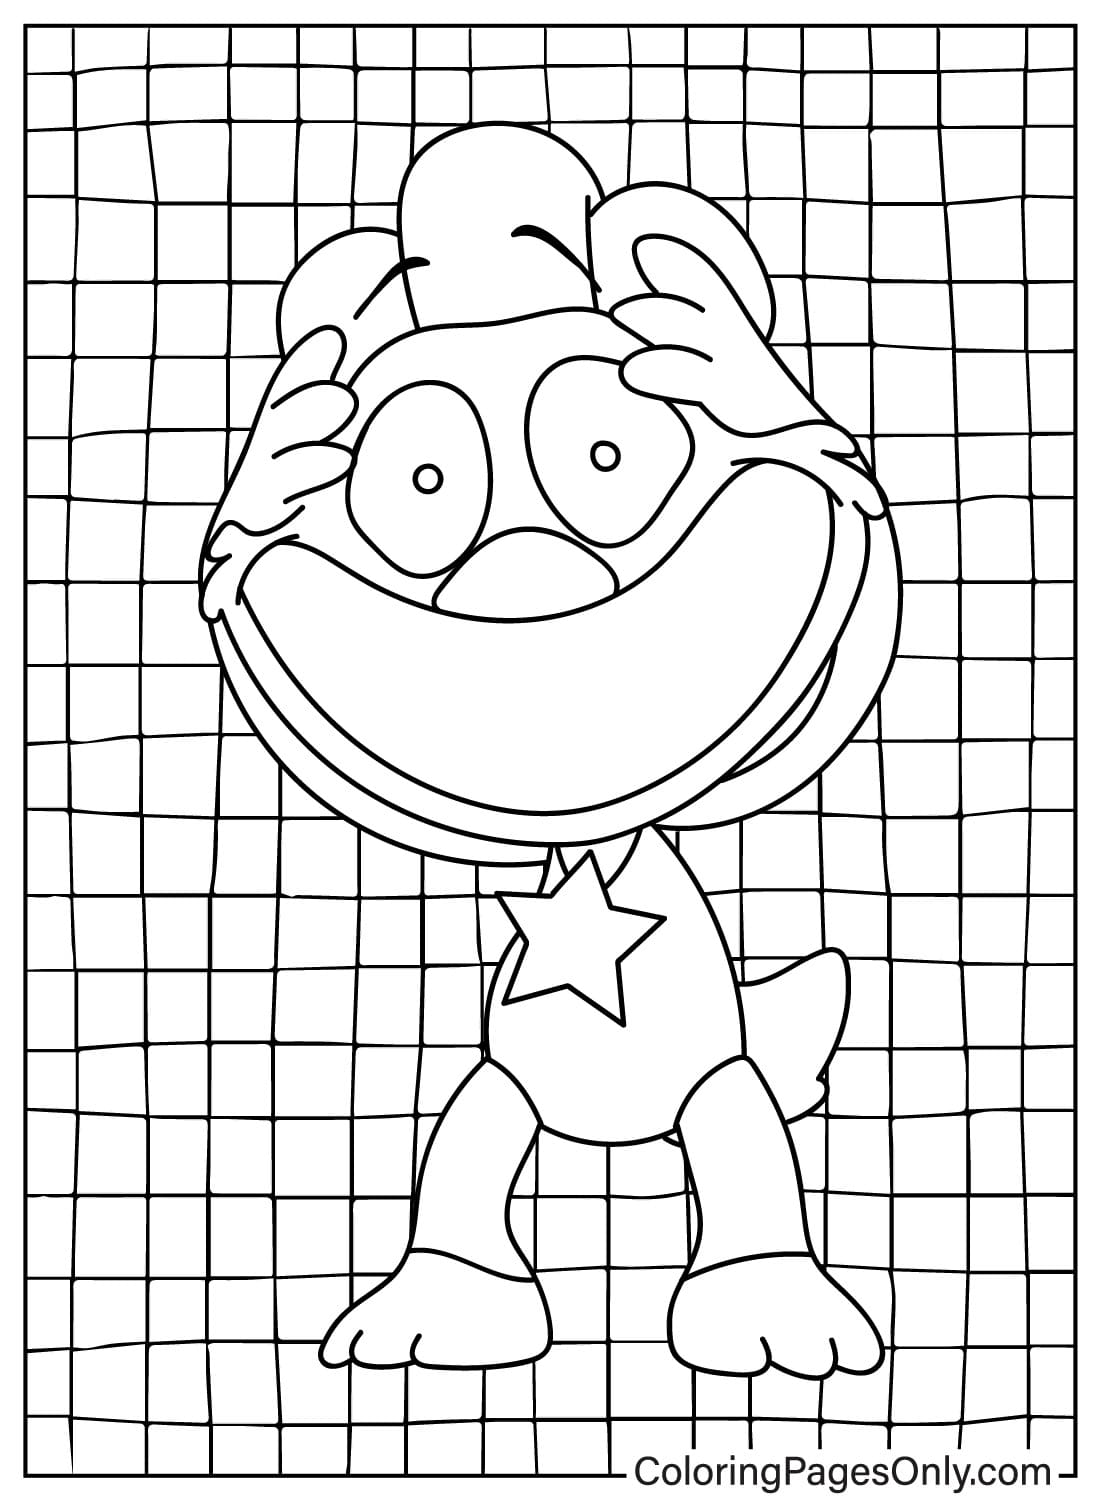 KickinChicken Scared Coloring Page from KickinChicken